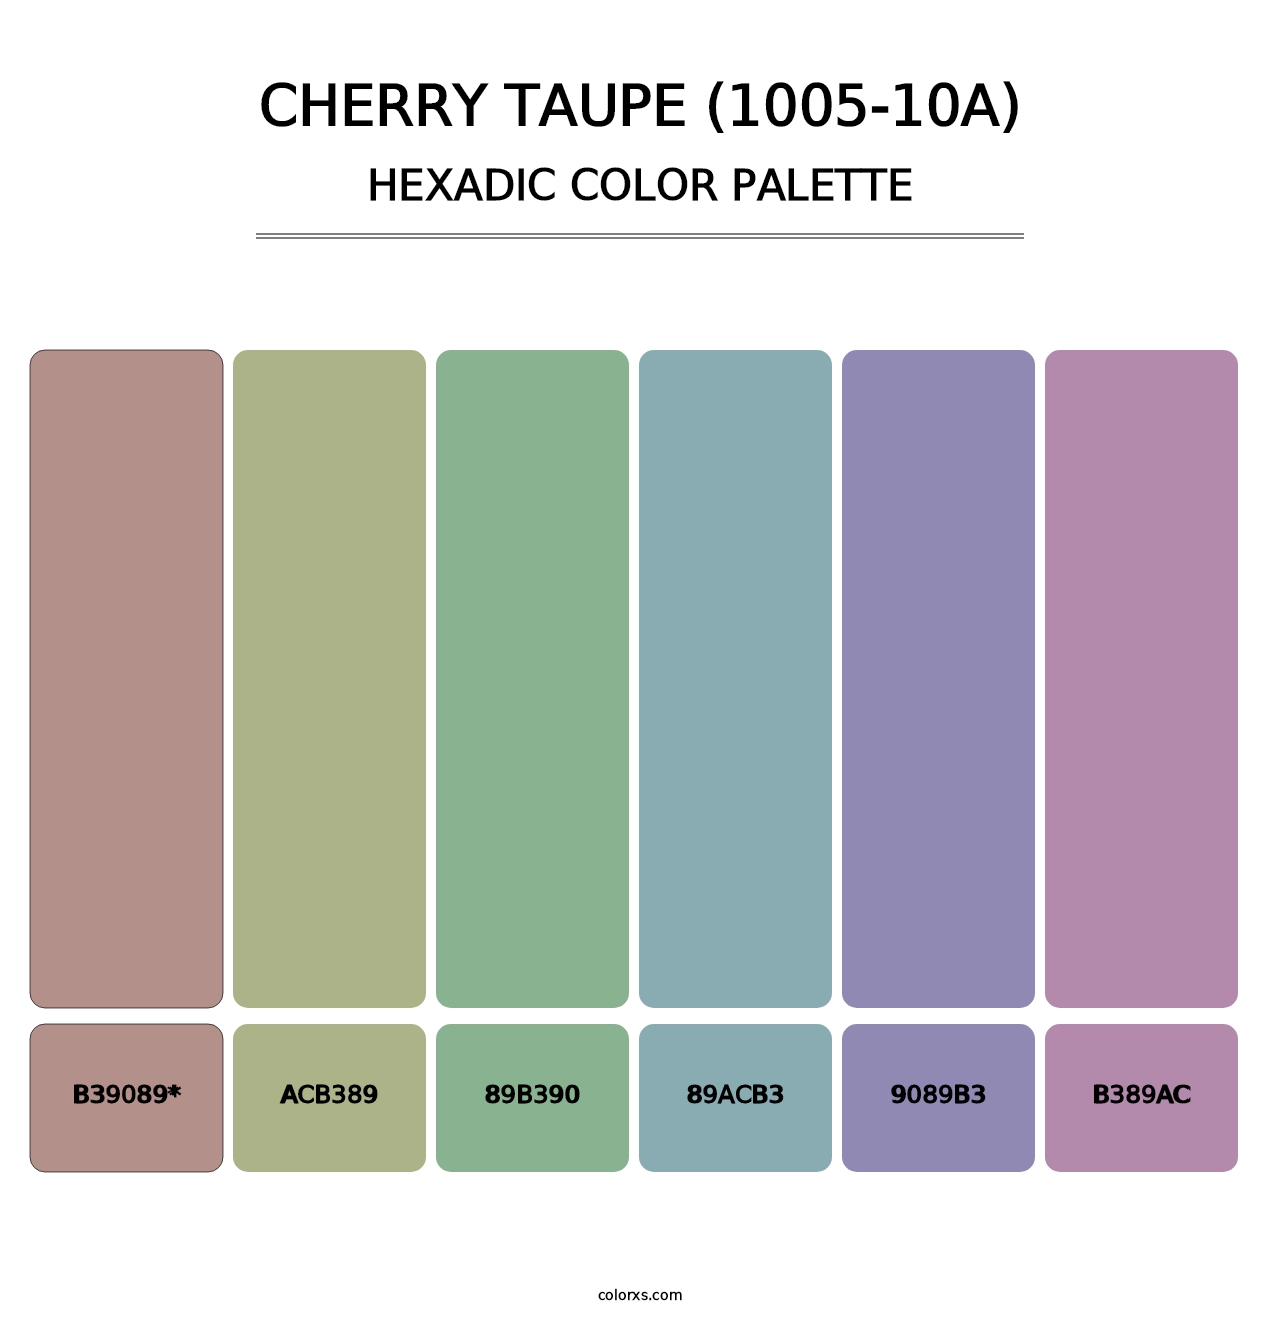 Cherry Taupe (1005-10A) - Hexadic Color Palette